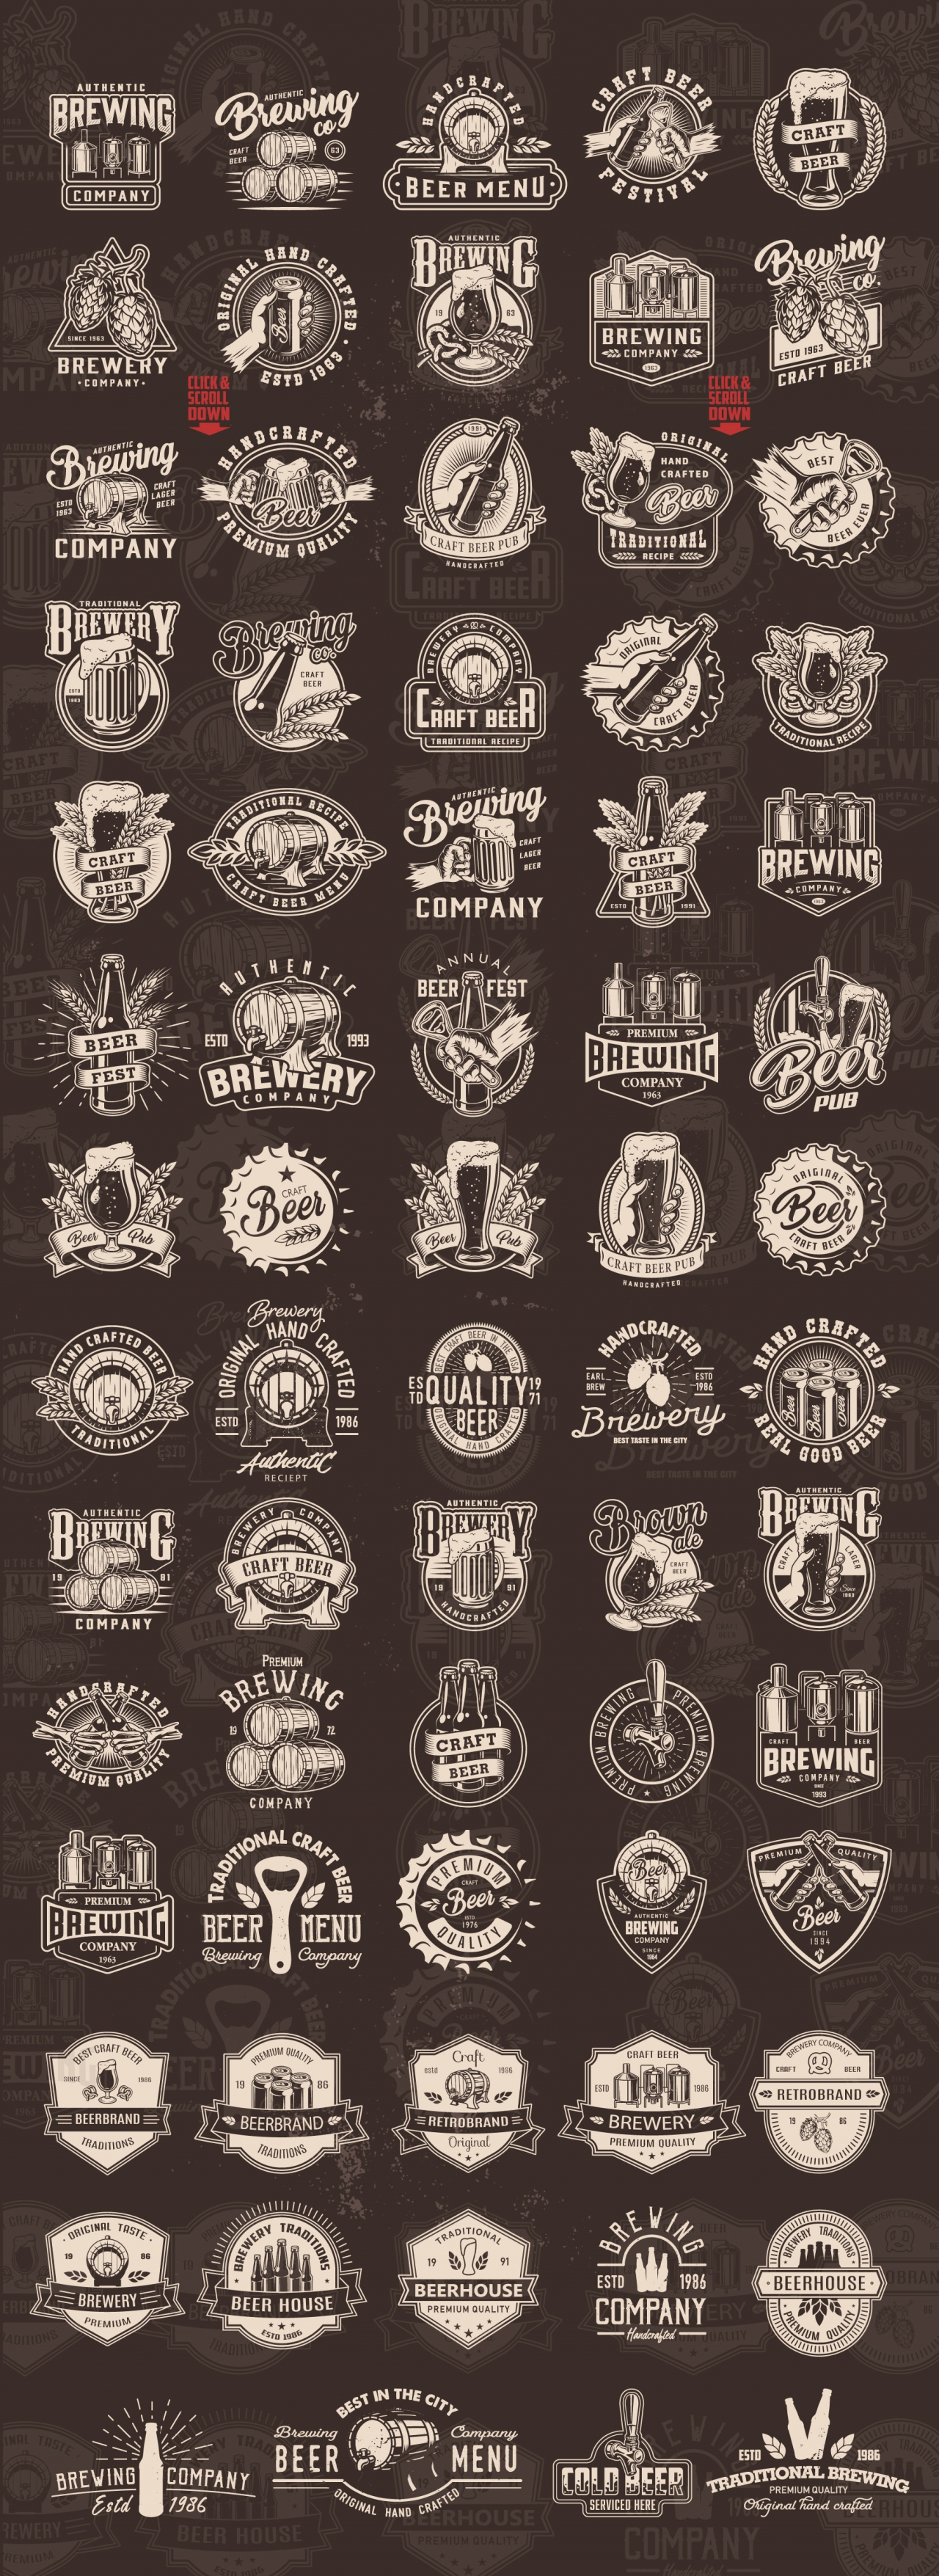 Old school style beer prints collection with beer glasses, mugs, bottles, metal cans, caps, beer wooden casks, hop cones, wheat ears, brewing machine, bottle opener and other elements on dark background